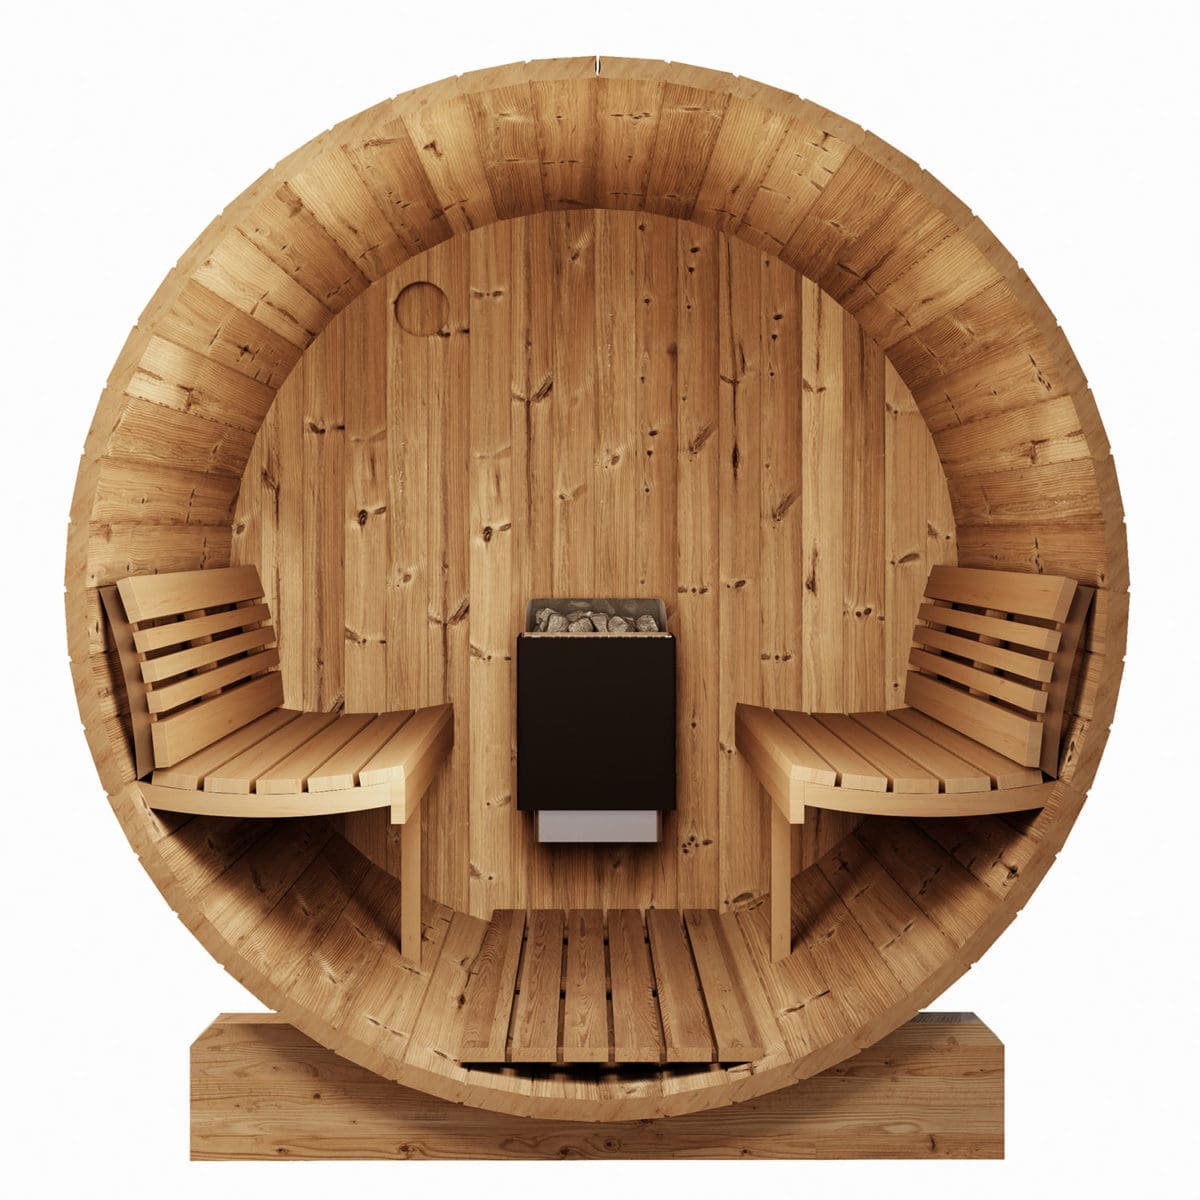 The image shows a cross-sectional view of the SaunaLife Ergo Barrel Sauna, revealing the curved interior design. The diagram indicates the ergonomic seating layout, made from Grade A aspen, that contours to the shape of the sauna. The image further helps visualize the construction and assembly of the sauna.